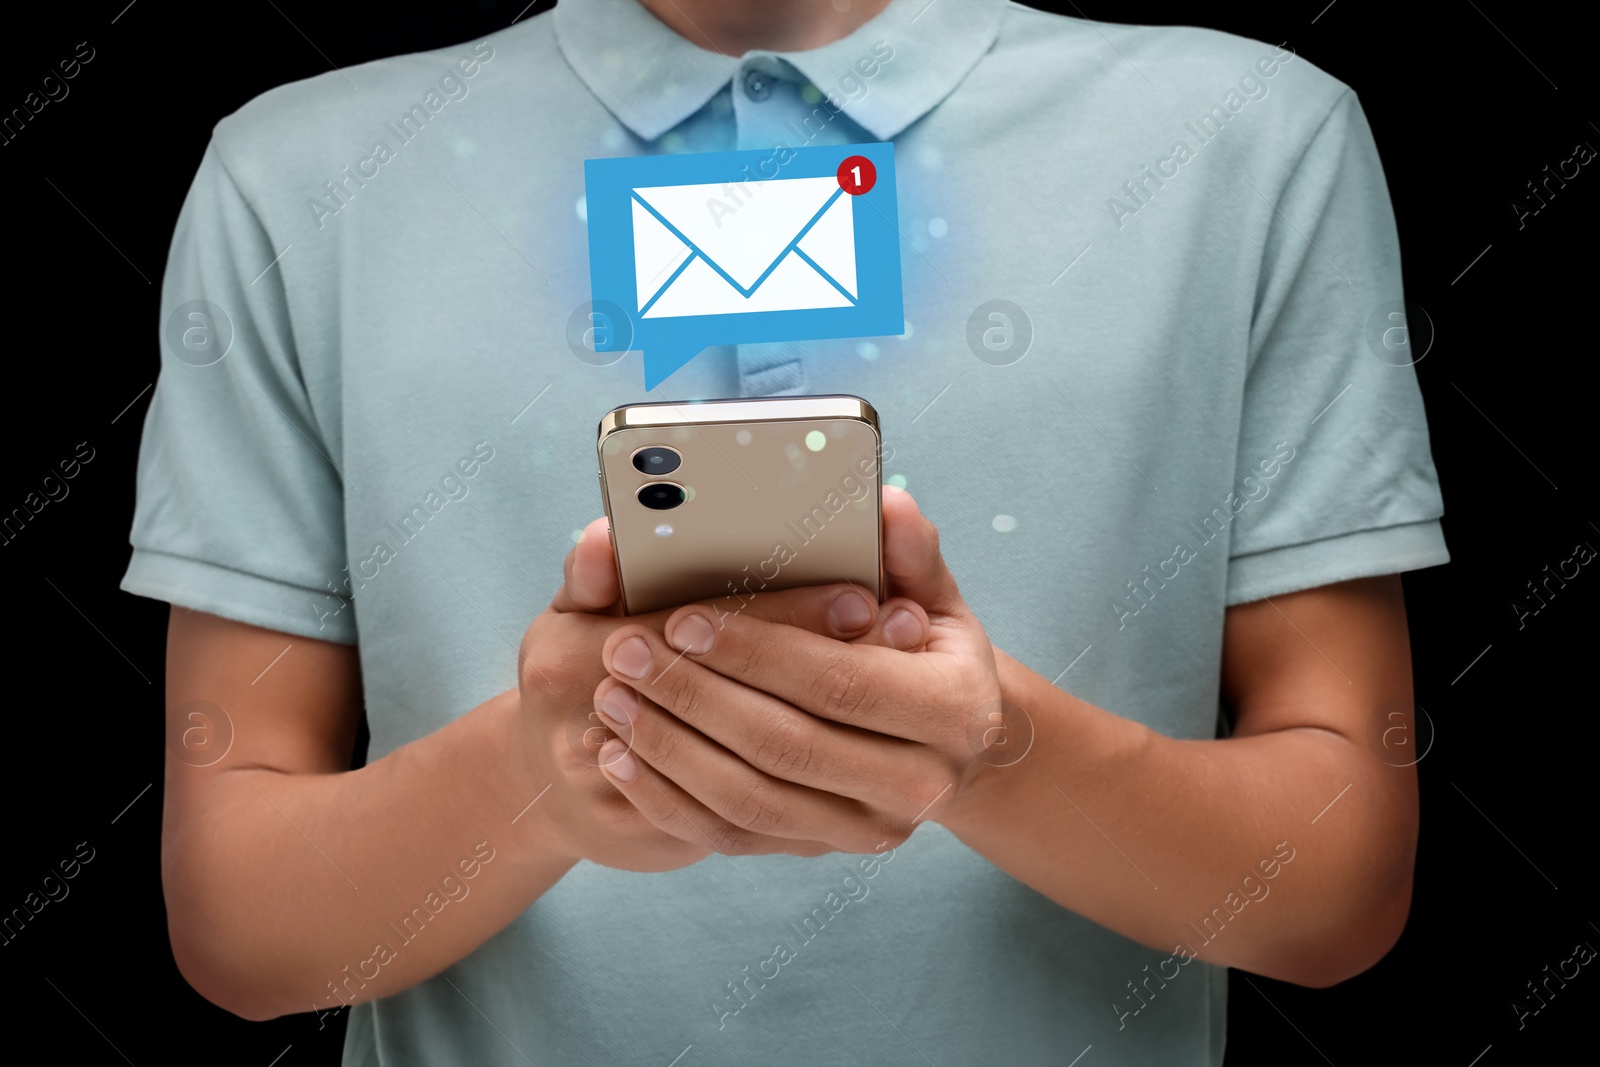 Image of Email. Man using mobile phone on black background, closeup. Letter illustration over device